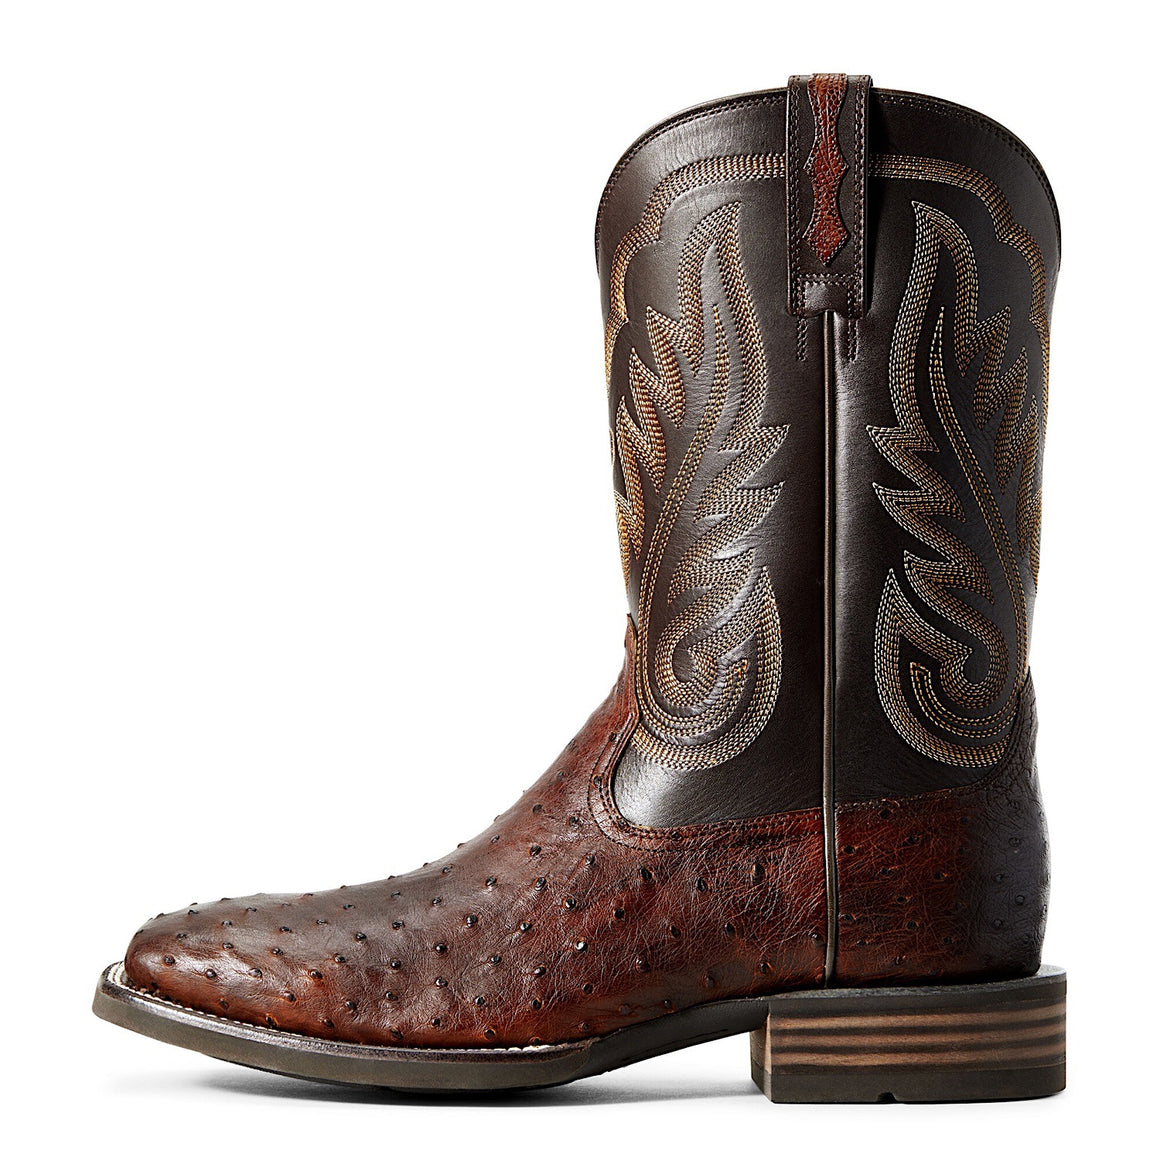 rm williams ostrich boots